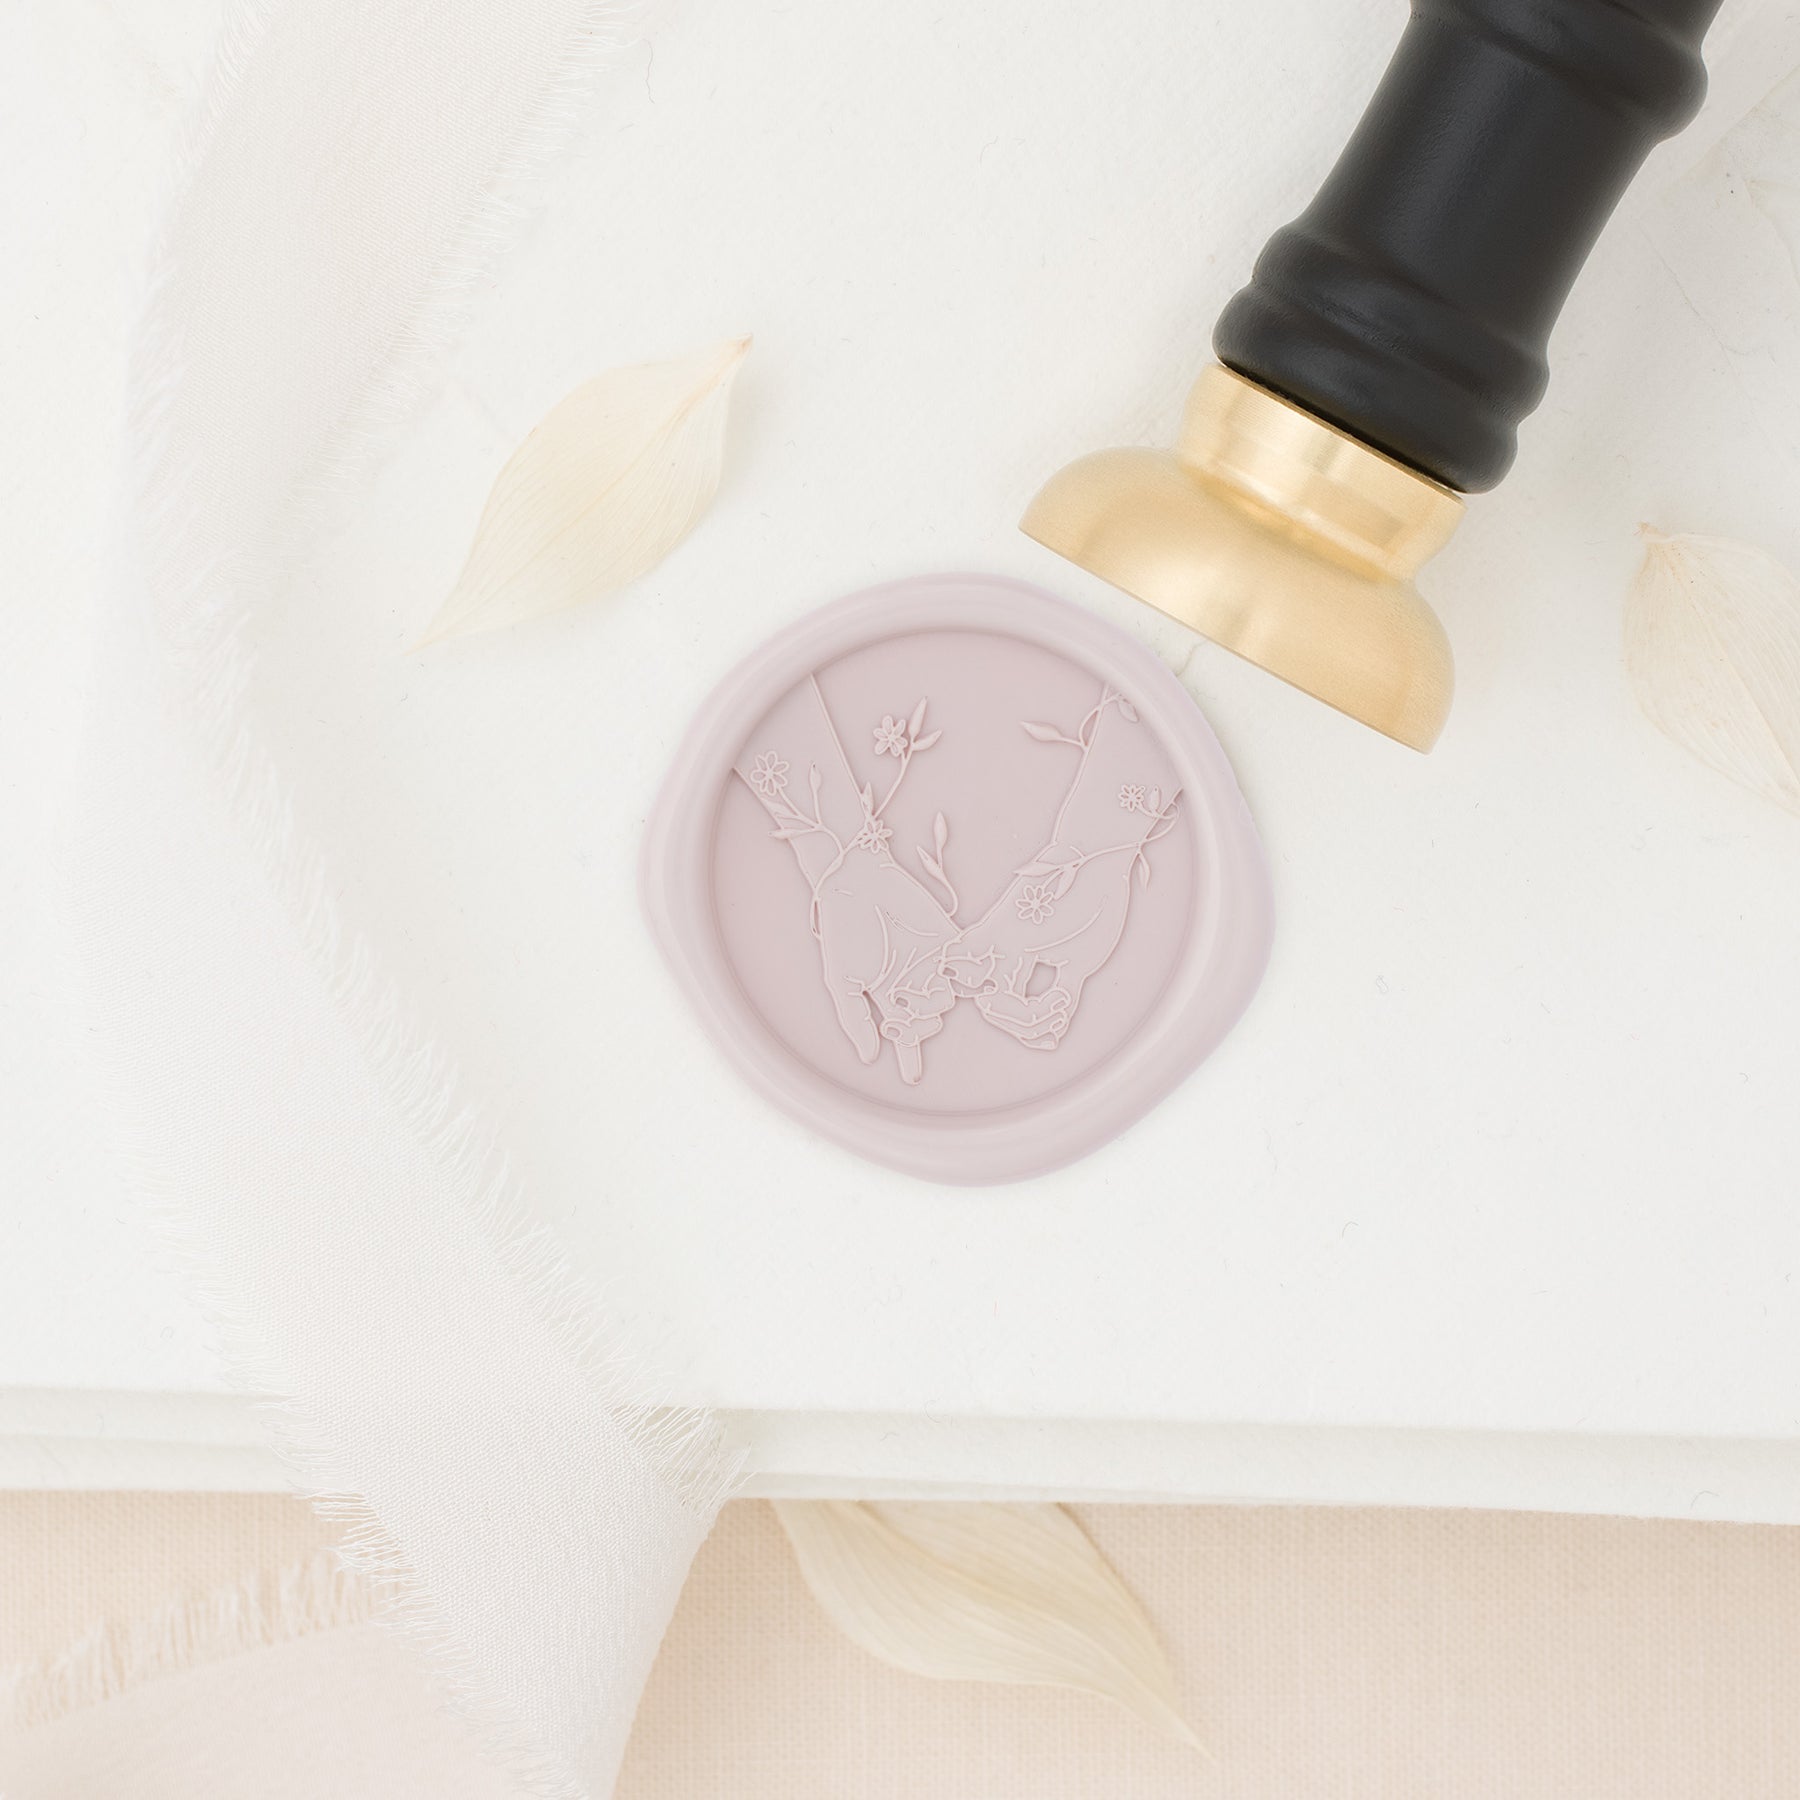 Pinky Promise Wax Stamp (Mr & Mr)